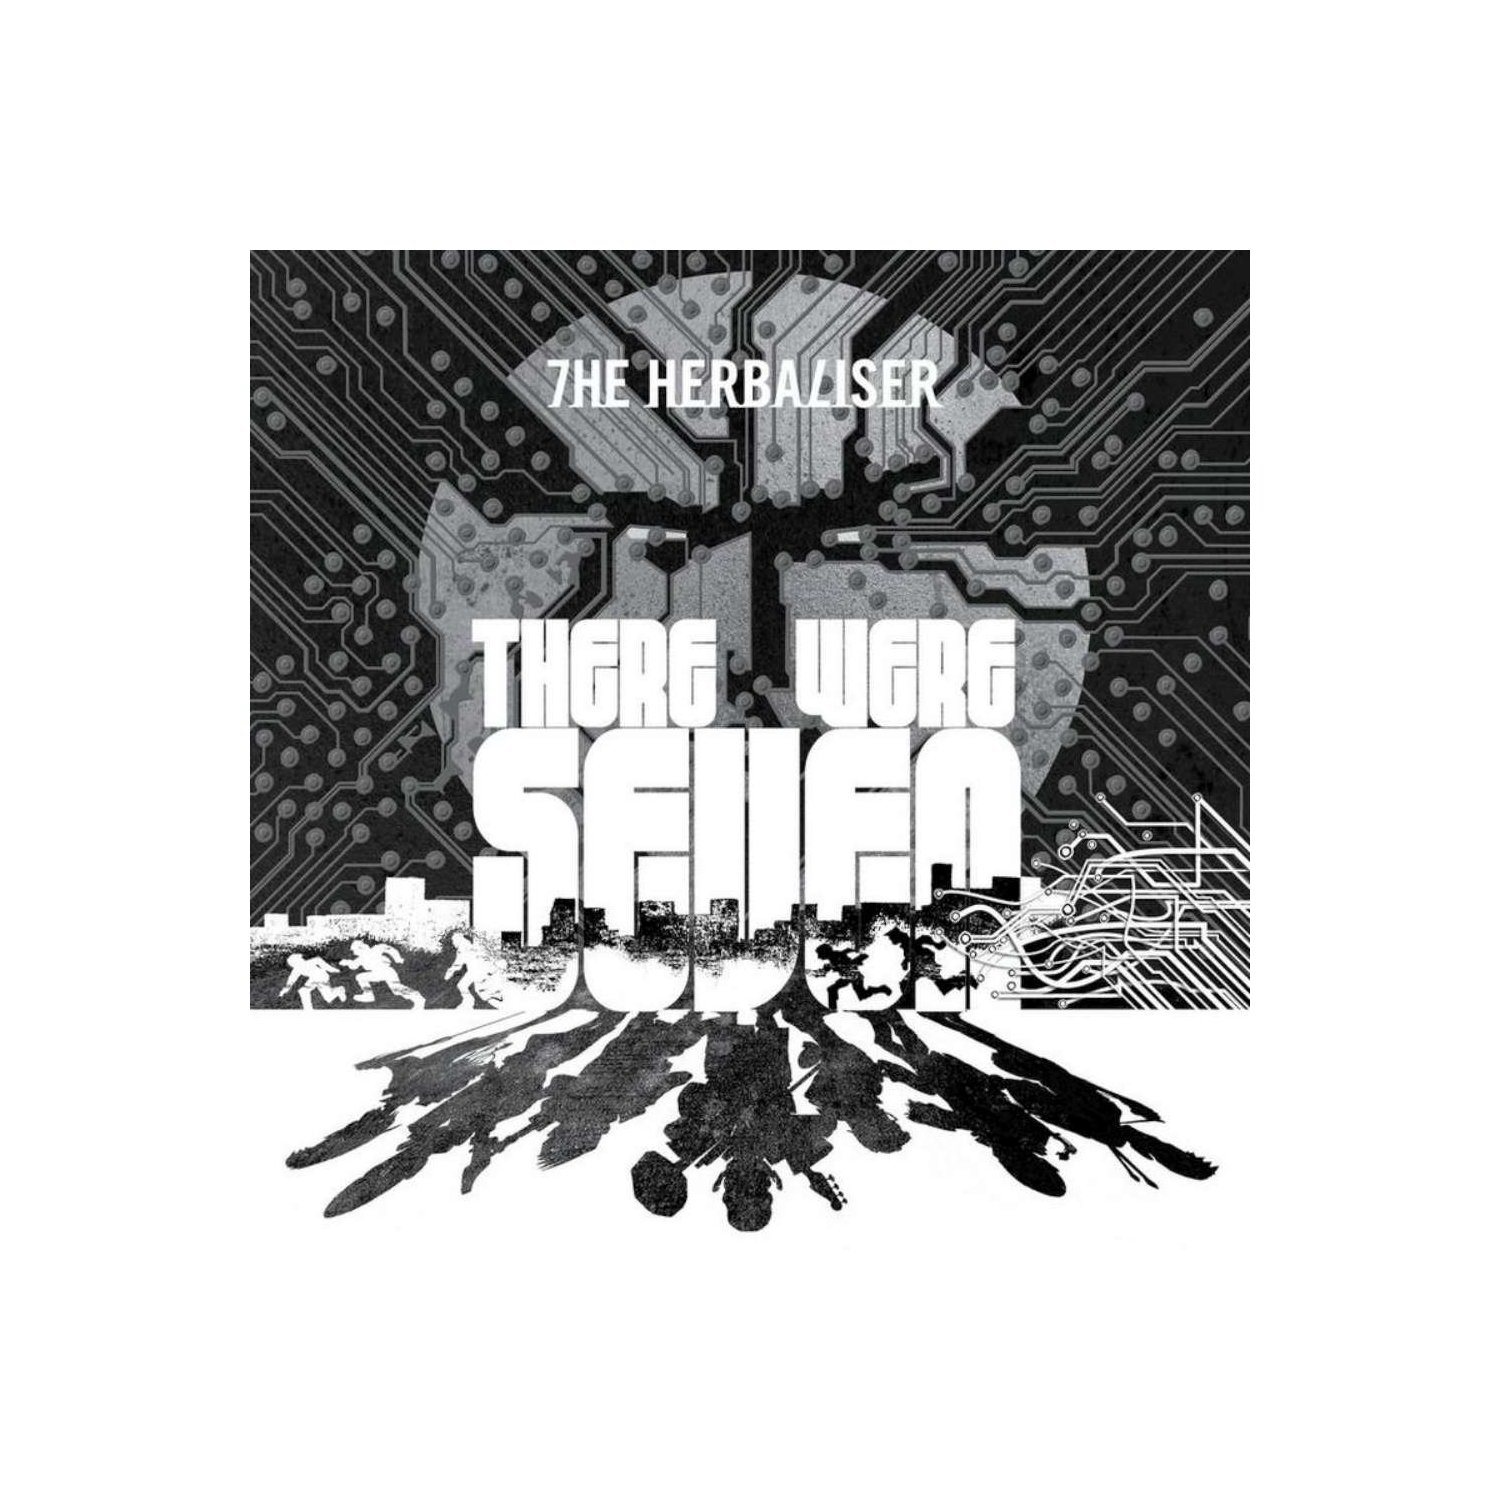 The Herbaliser - They Were Seven